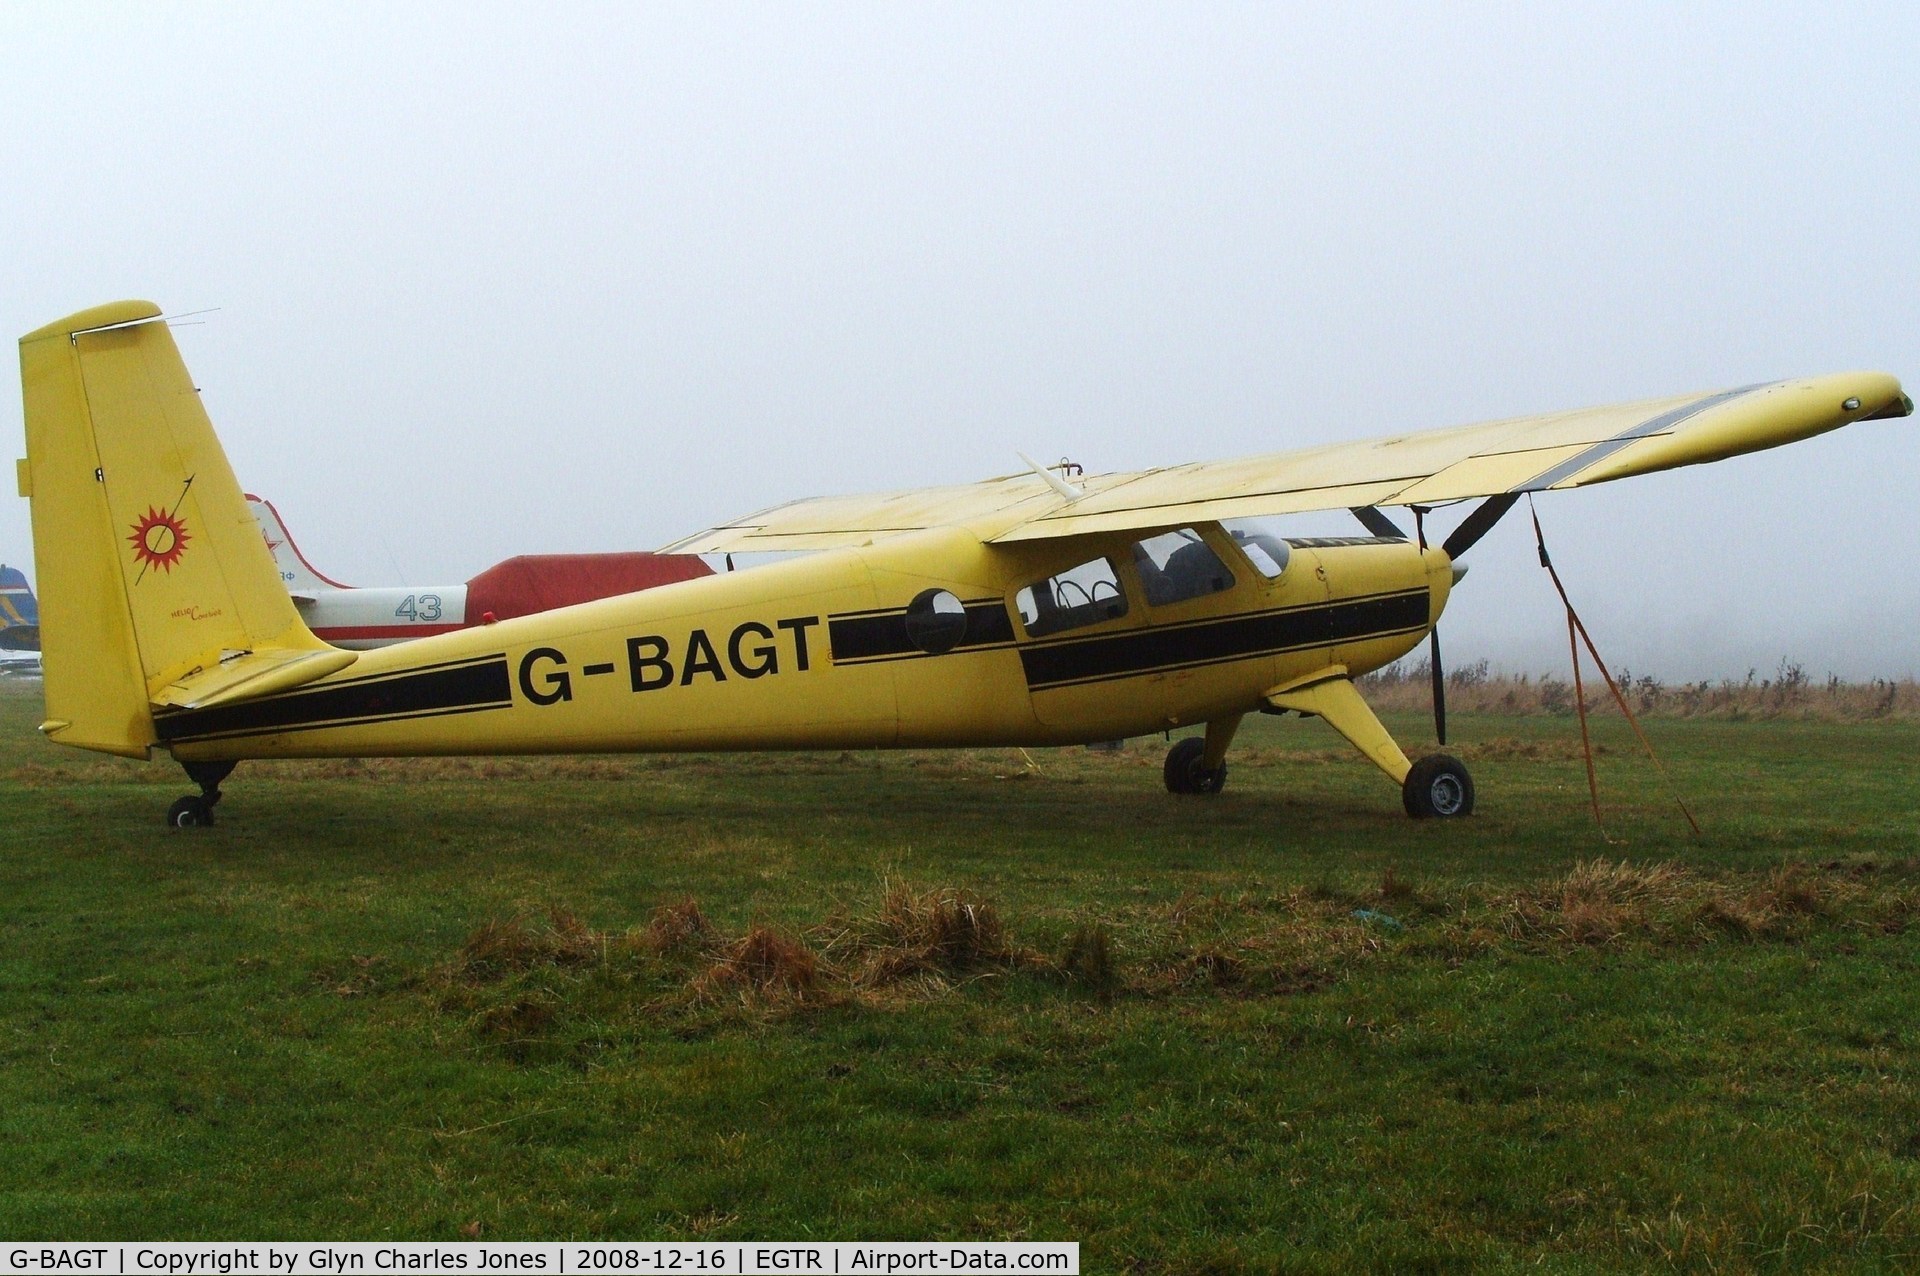 G-BAGT, 1968 Helio H-295-1200 Super Courier C/N 1288, Taken on a quiet cold and foggy day. With thanks to Elstree control tower who granted me authority to take photographs on the aerodrome. Built in 1968 and was previously CR-LJG.